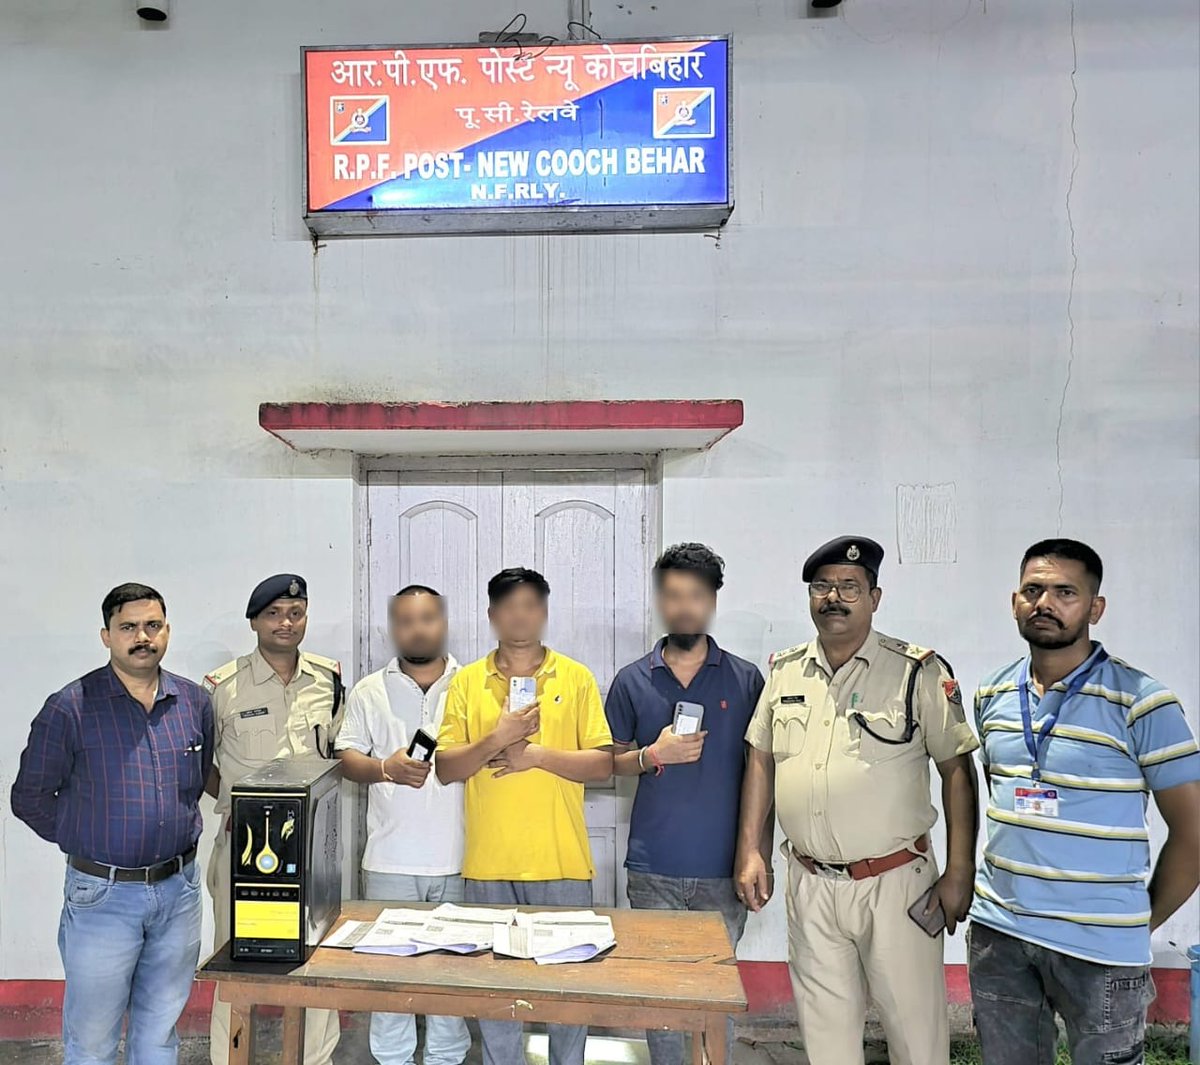 RPF Crime Prevention & Detection Squad Alipurduar along with  RPF NCB apprehended three unauthorised Railway e-ticket seller/agent from Gitaldah bazar area of Coochbehar district with future e ticket worth Rs 14055 and one illegal software @drm_apdj @RPF_NFR @RPF_INDIA #upalabdh